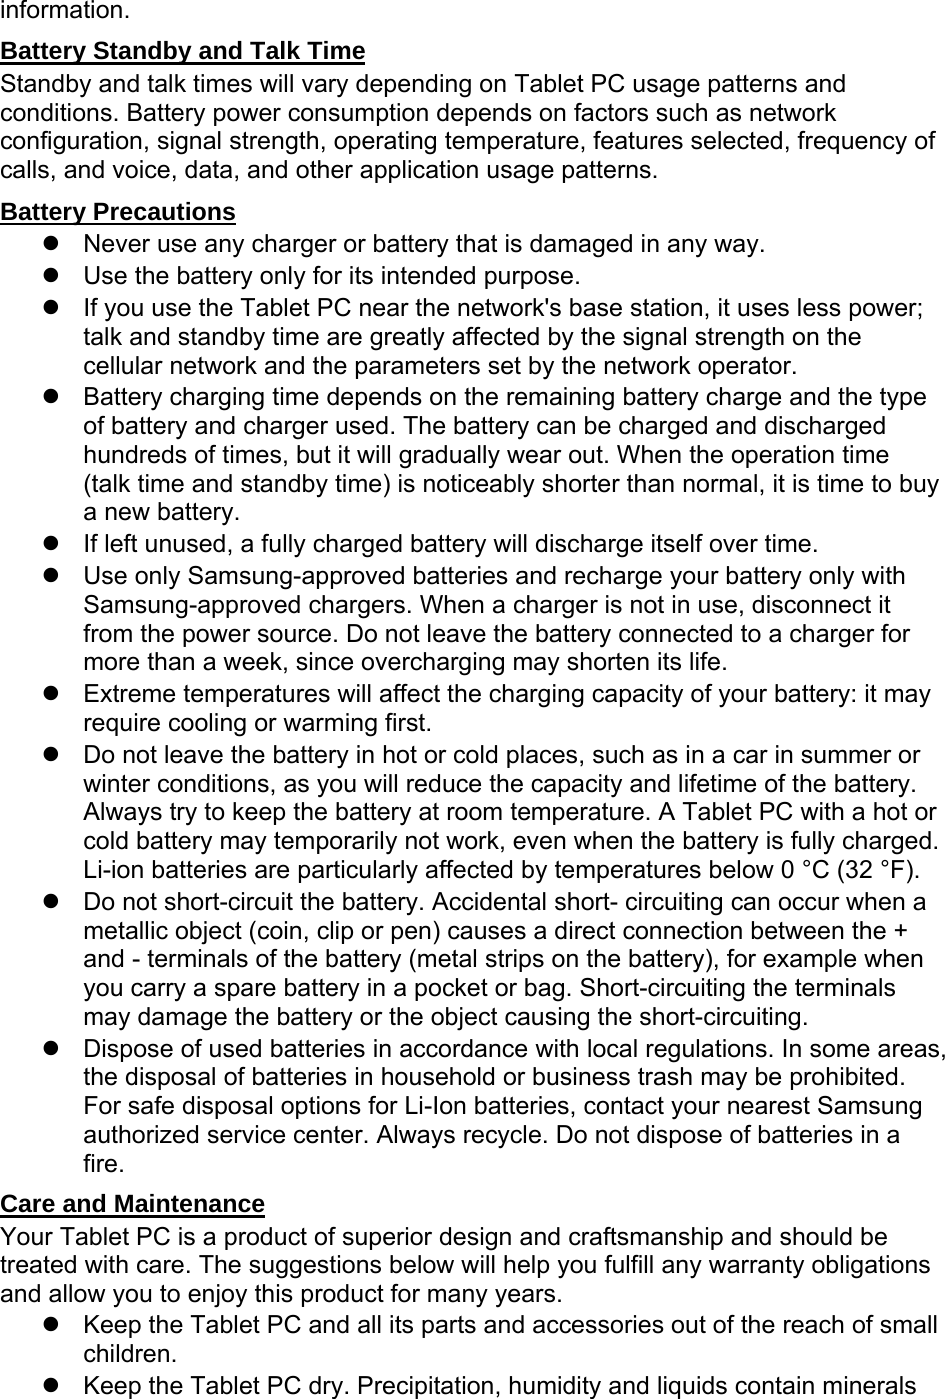 information. Battery Standby and Talk Time Standby and talk times will vary depending on Tablet PC usage patterns and conditions. Battery power consumption depends on factors such as network configuration, signal strength, operating temperature, features selected, frequency of calls, and voice, data, and other application usage patterns.   Battery Precautions   Never use any charger or battery that is damaged in any way.   Use the battery only for its intended purpose.   If you use the Tablet PC near the network&apos;s base station, it uses less power; talk and standby time are greatly affected by the signal strength on the cellular network and the parameters set by the network operator.   Battery charging time depends on the remaining battery charge and the type of battery and charger used. The battery can be charged and discharged hundreds of times, but it will gradually wear out. When the operation time (talk time and standby time) is noticeably shorter than normal, it is time to buy a new battery.   If left unused, a fully charged battery will discharge itself over time.   Use only Samsung-approved batteries and recharge your battery only with Samsung-approved chargers. When a charger is not in use, disconnect it from the power source. Do not leave the battery connected to a charger for more than a week, since overcharging may shorten its life.   Extreme temperatures will affect the charging capacity of your battery: it may require cooling or warming first.   Do not leave the battery in hot or cold places, such as in a car in summer or winter conditions, as you will reduce the capacity and lifetime of the battery. Always try to keep the battery at room temperature. A Tablet PC with a hot or cold battery may temporarily not work, even when the battery is fully charged. Li-ion batteries are particularly affected by temperatures below 0 °C (32 °F).   Do not short-circuit the battery. Accidental short- circuiting can occur when a metallic object (coin, clip or pen) causes a direct connection between the + and - terminals of the battery (metal strips on the battery), for example when you carry a spare battery in a pocket or bag. Short-circuiting the terminals may damage the battery or the object causing the short-circuiting.   Dispose of used batteries in accordance with local regulations. In some areas, the disposal of batteries in household or business trash may be prohibited. For safe disposal options for Li-Ion batteries, contact your nearest Samsung authorized service center. Always recycle. Do not dispose of batteries in a fire. Care and Maintenance Your Tablet PC is a product of superior design and craftsmanship and should be treated with care. The suggestions below will help you fulfill any warranty obligations and allow you to enjoy this product for many years.   Keep the Tablet PC and all its parts and accessories out of the reach of small children.   Keep the Tablet PC dry. Precipitation, humidity and liquids contain minerals 